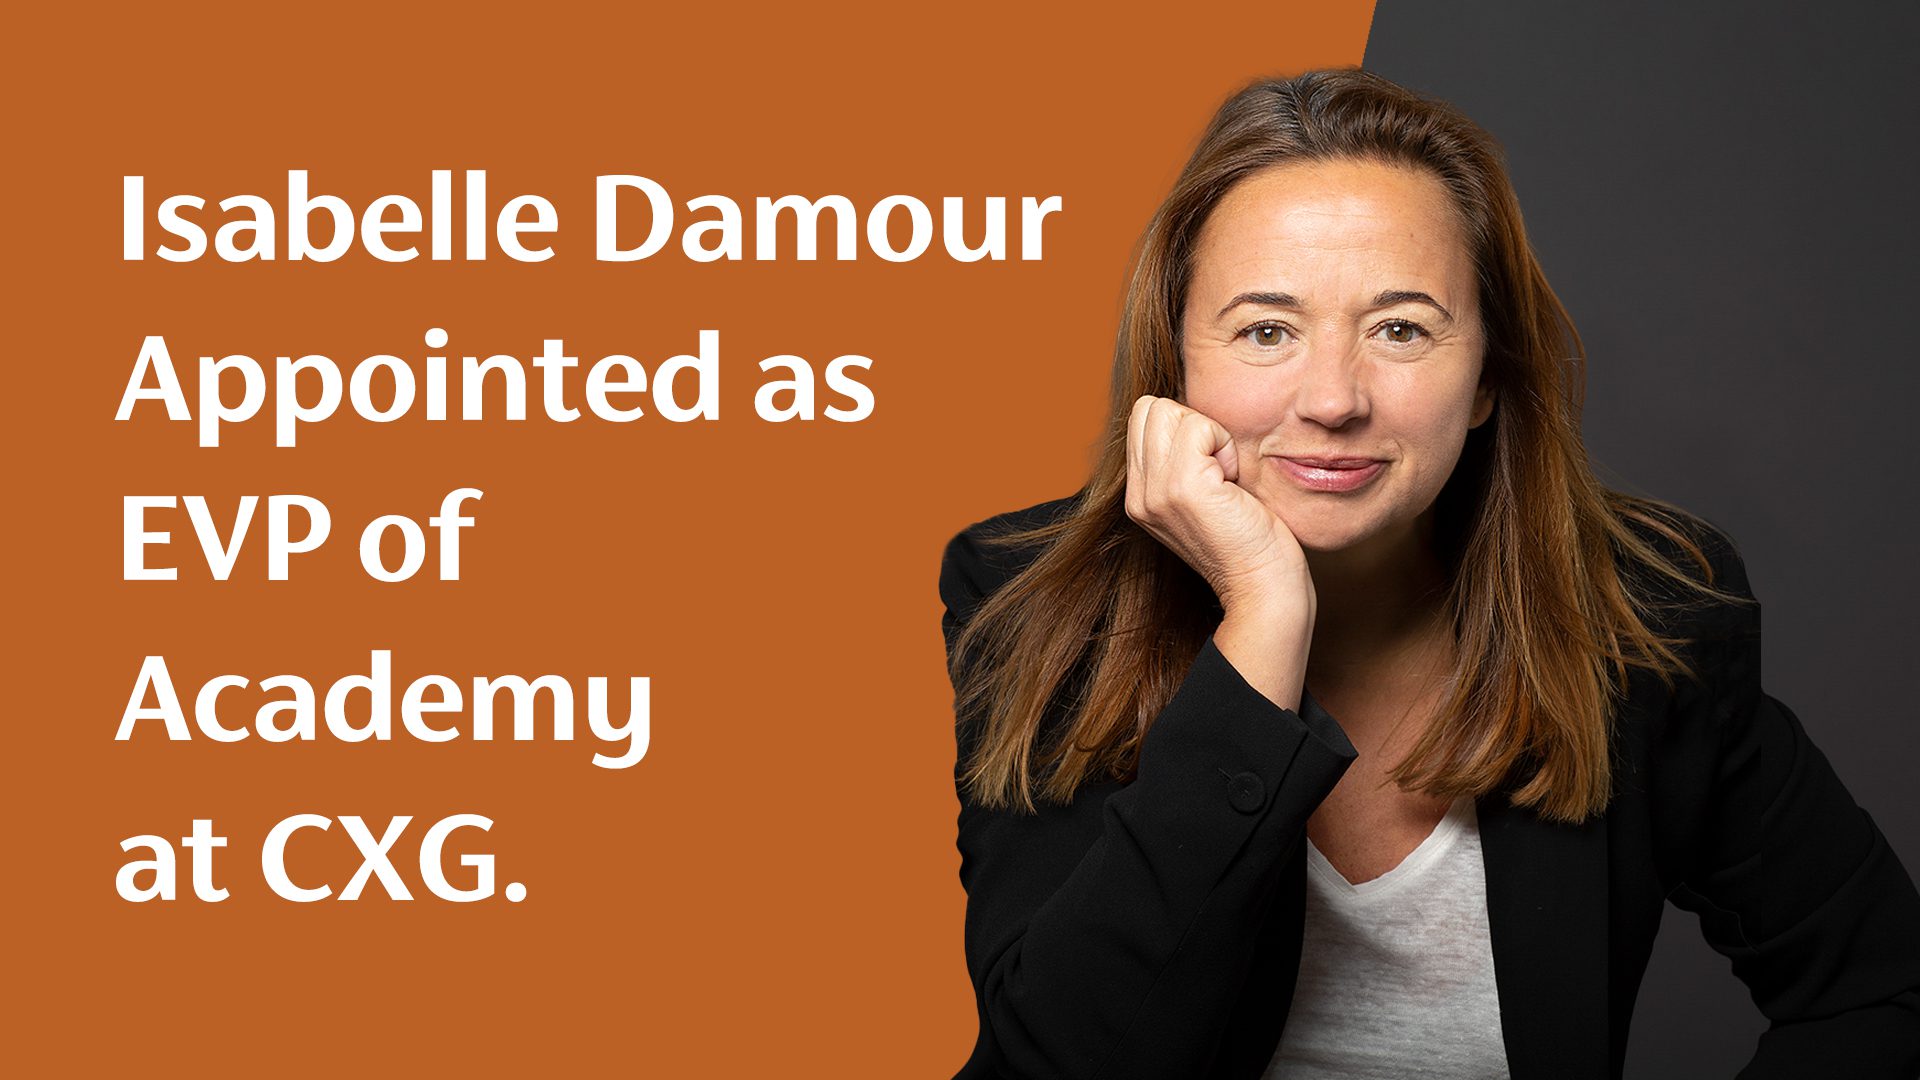 Isabelle Damour, CXG's new executive vice president